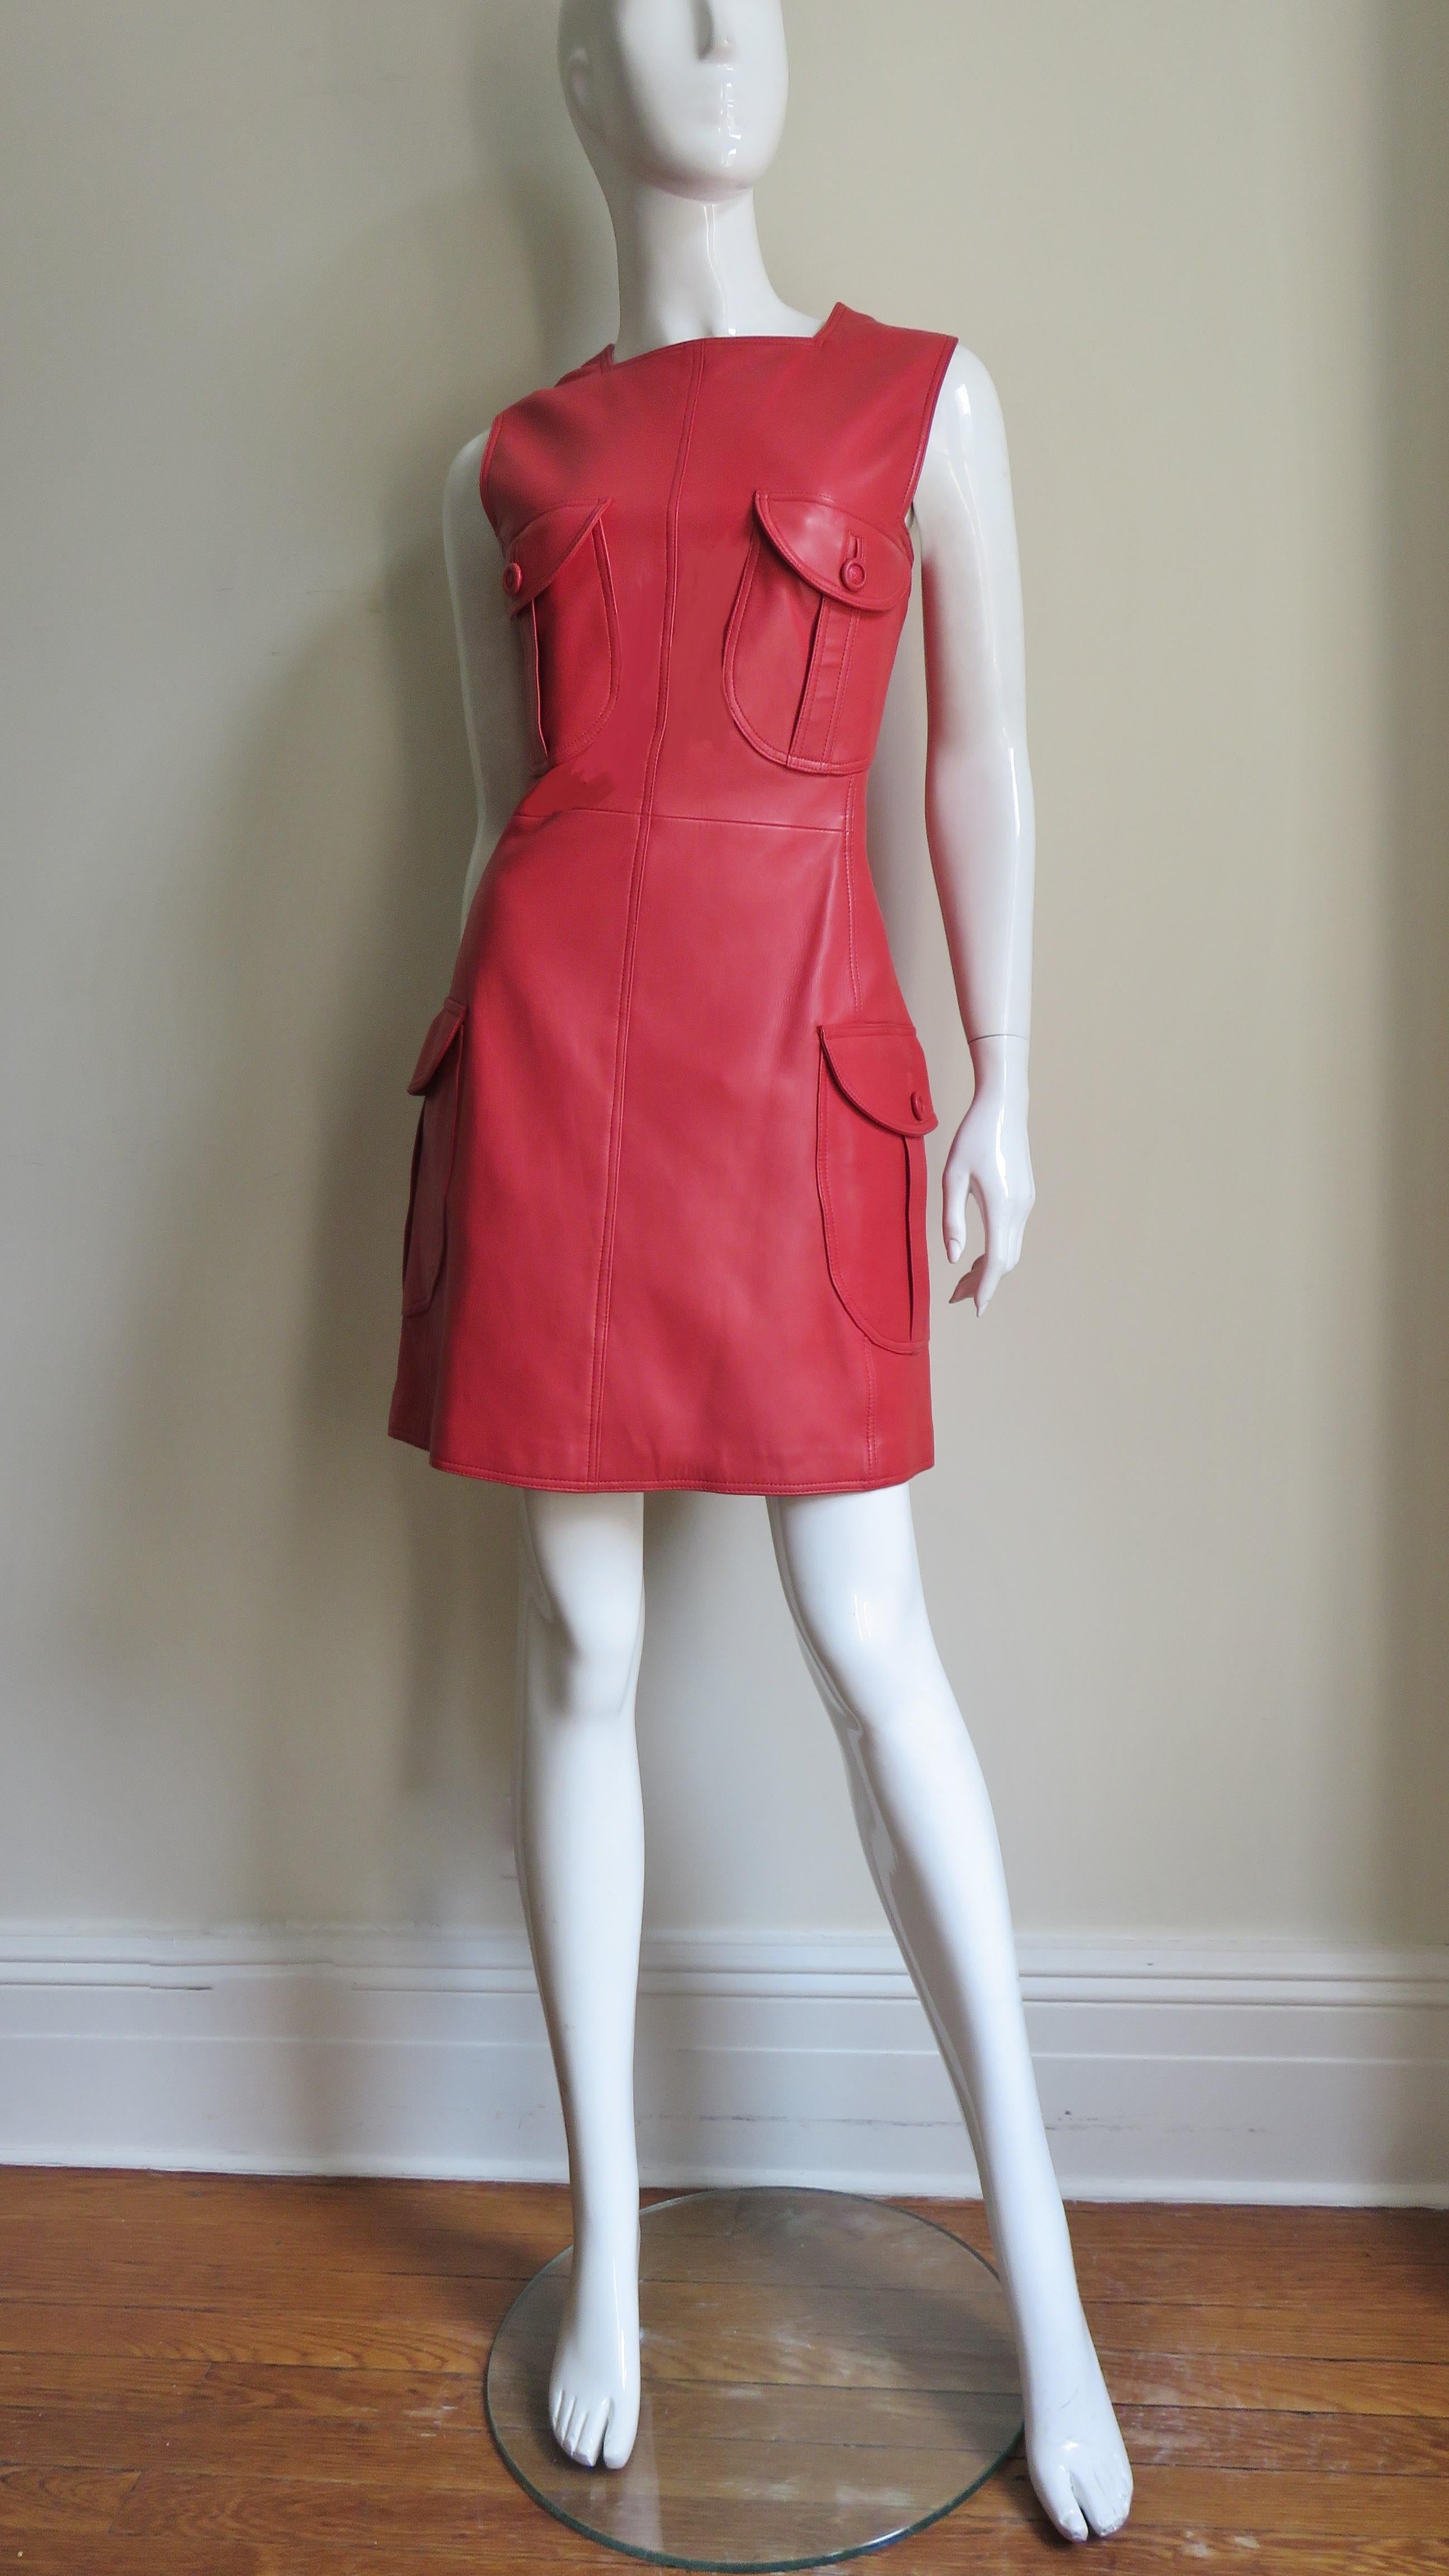 Gianni Versace New F/W 1996 Red Leather Dress For Sale 1